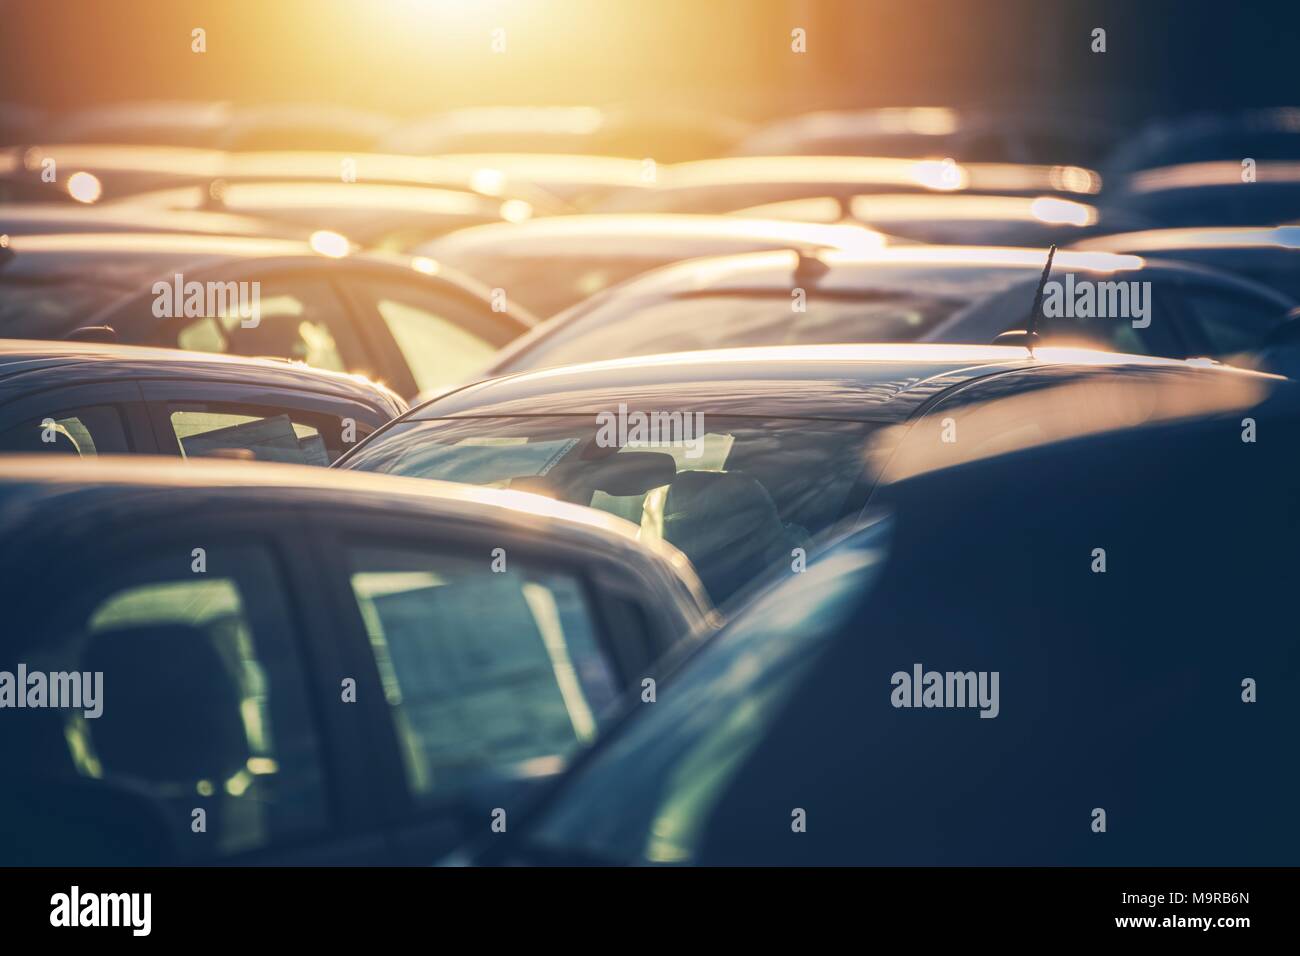 Dealership Lot Full of Cars. Automotive Sales Industry. Brand New and Pre Owned Vehicles For Sale. Stock Photo